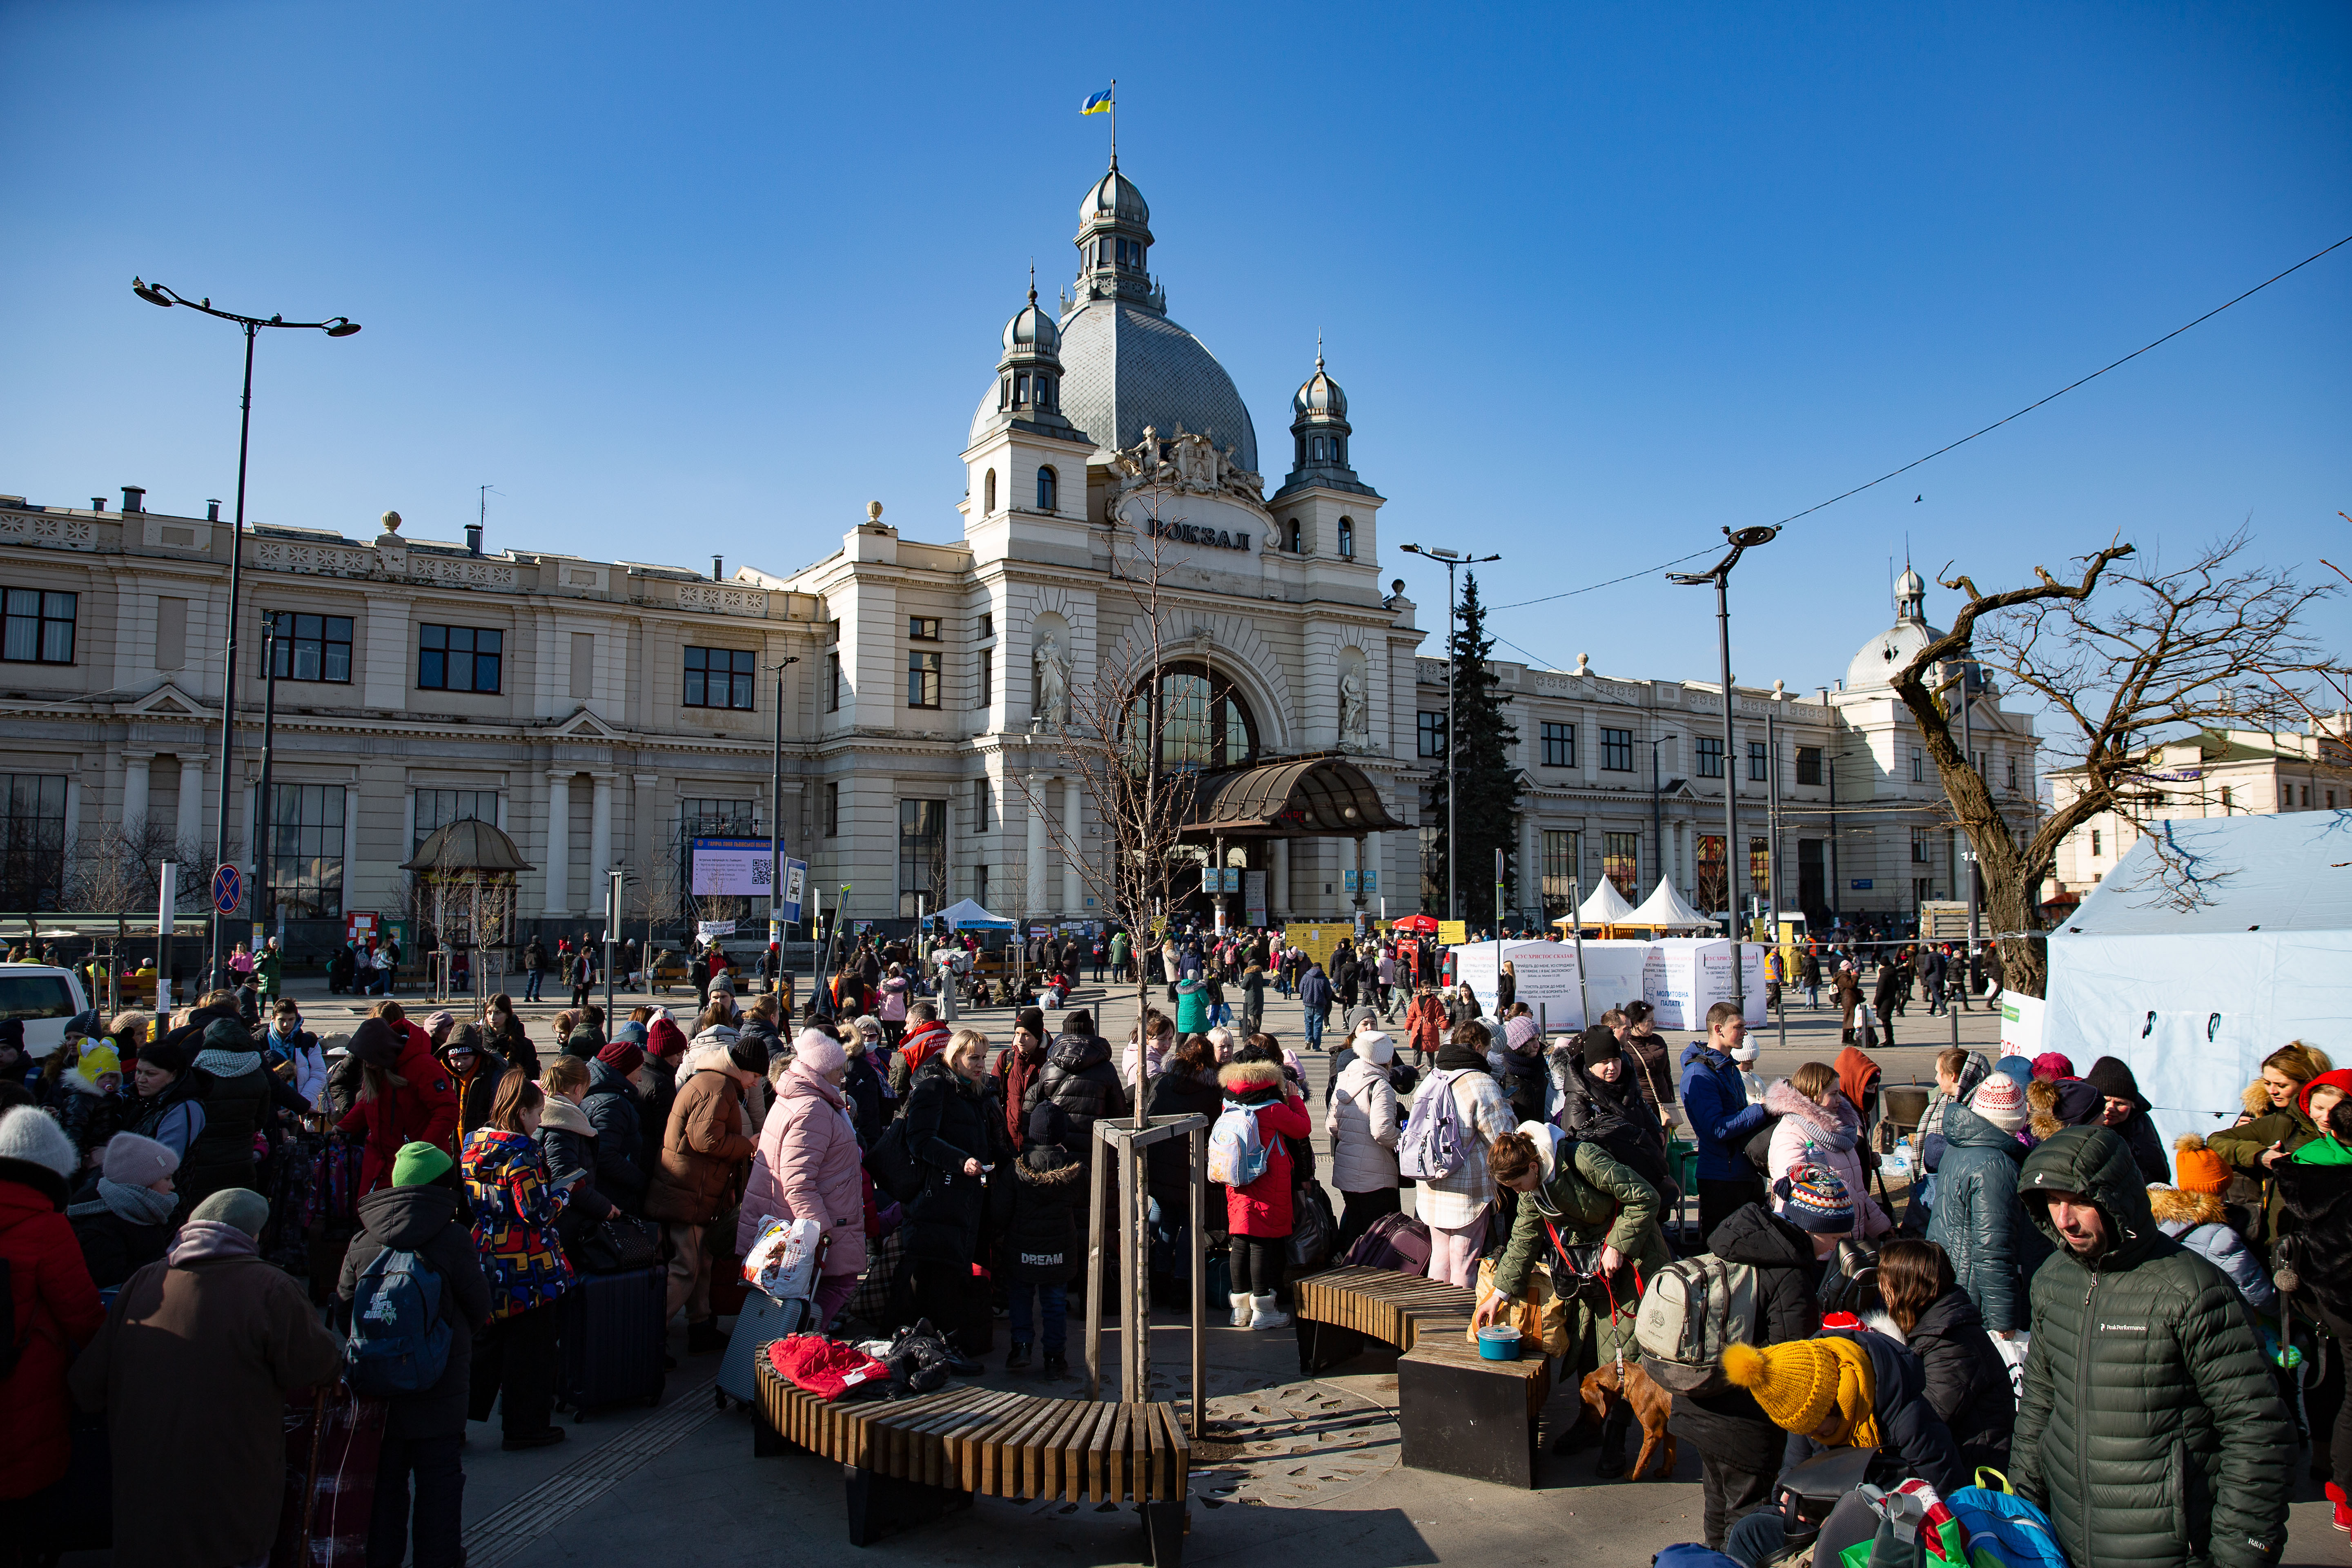 Tens of thousands of people evacuate through the train station in Lviv in Ukraine, March 2022. (Photo: Kieran McConville/Concern Worldwide)